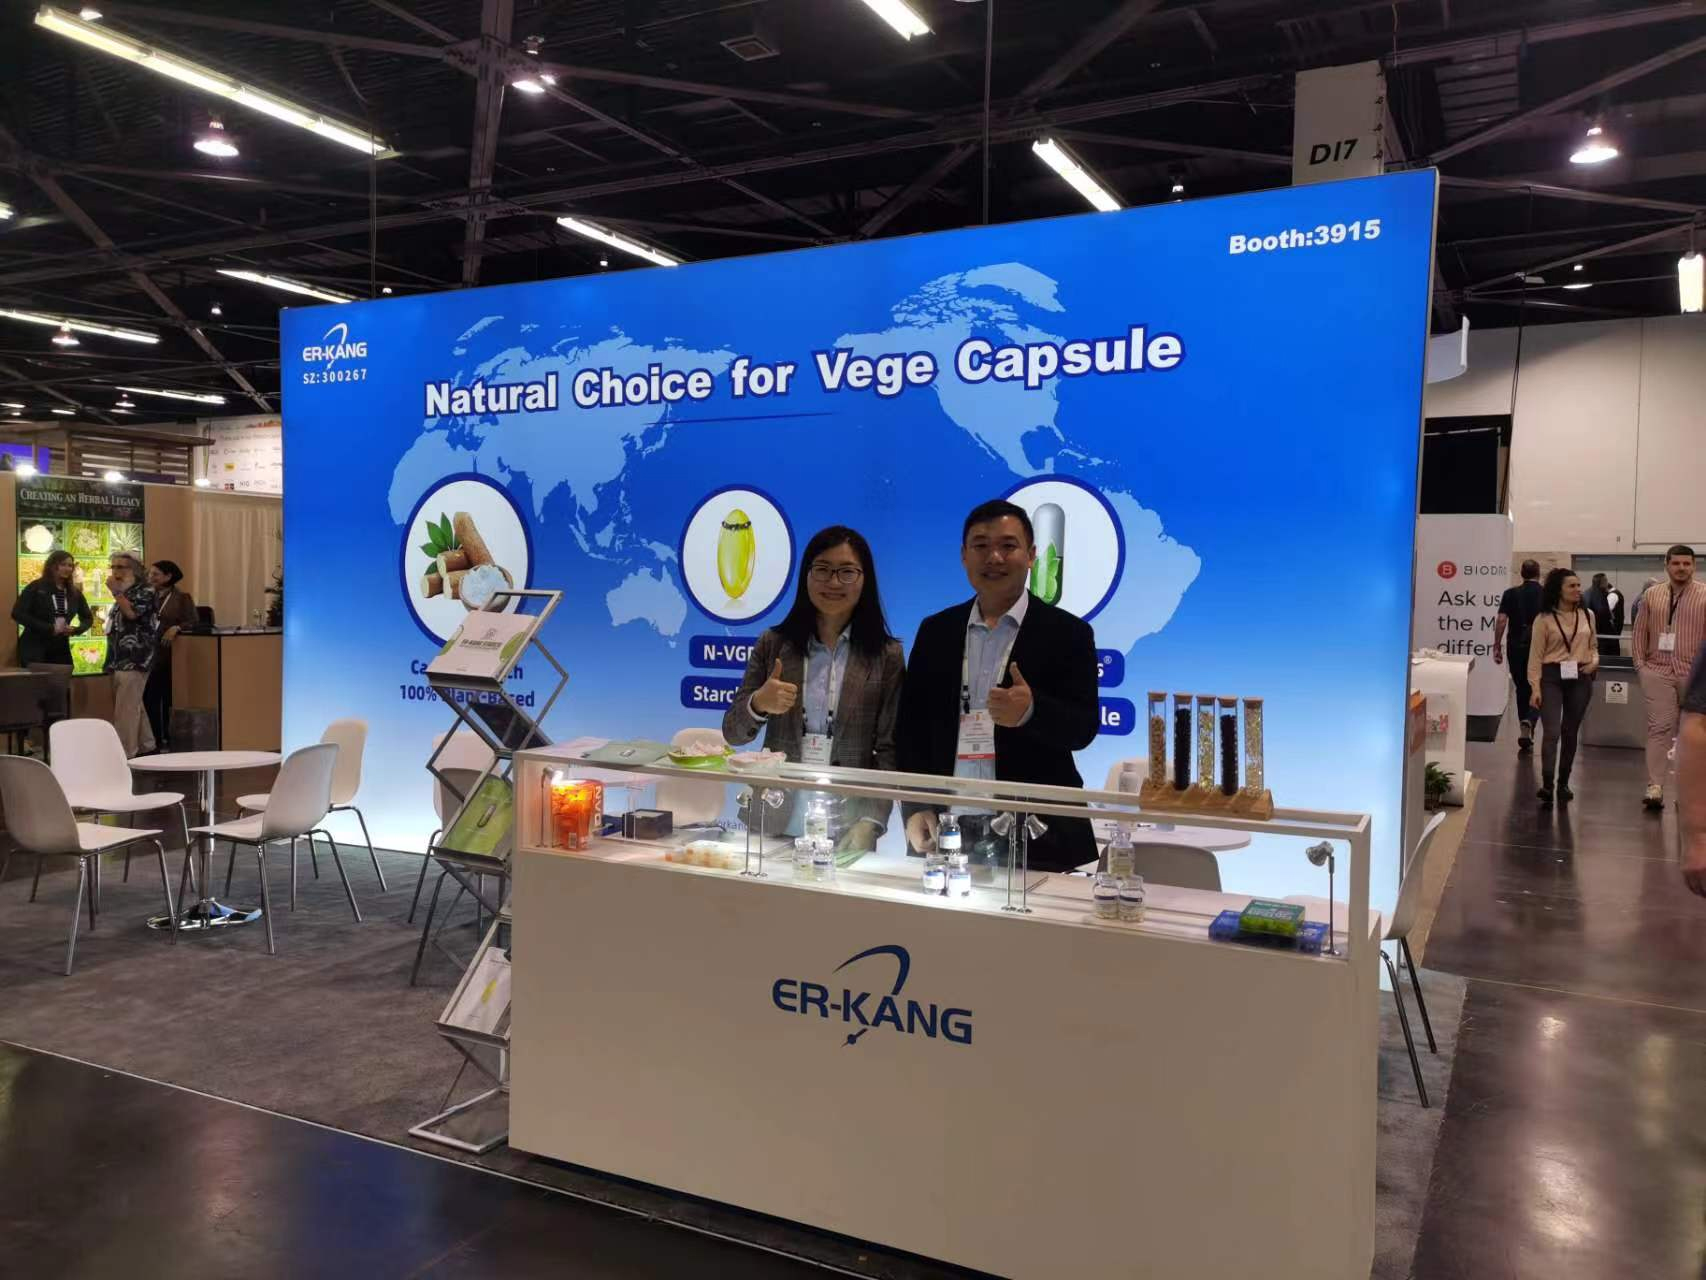 , Vege Capsules Attract Much Attention at Natural Products Expo West with Erkang’s Starchgel as a Representative